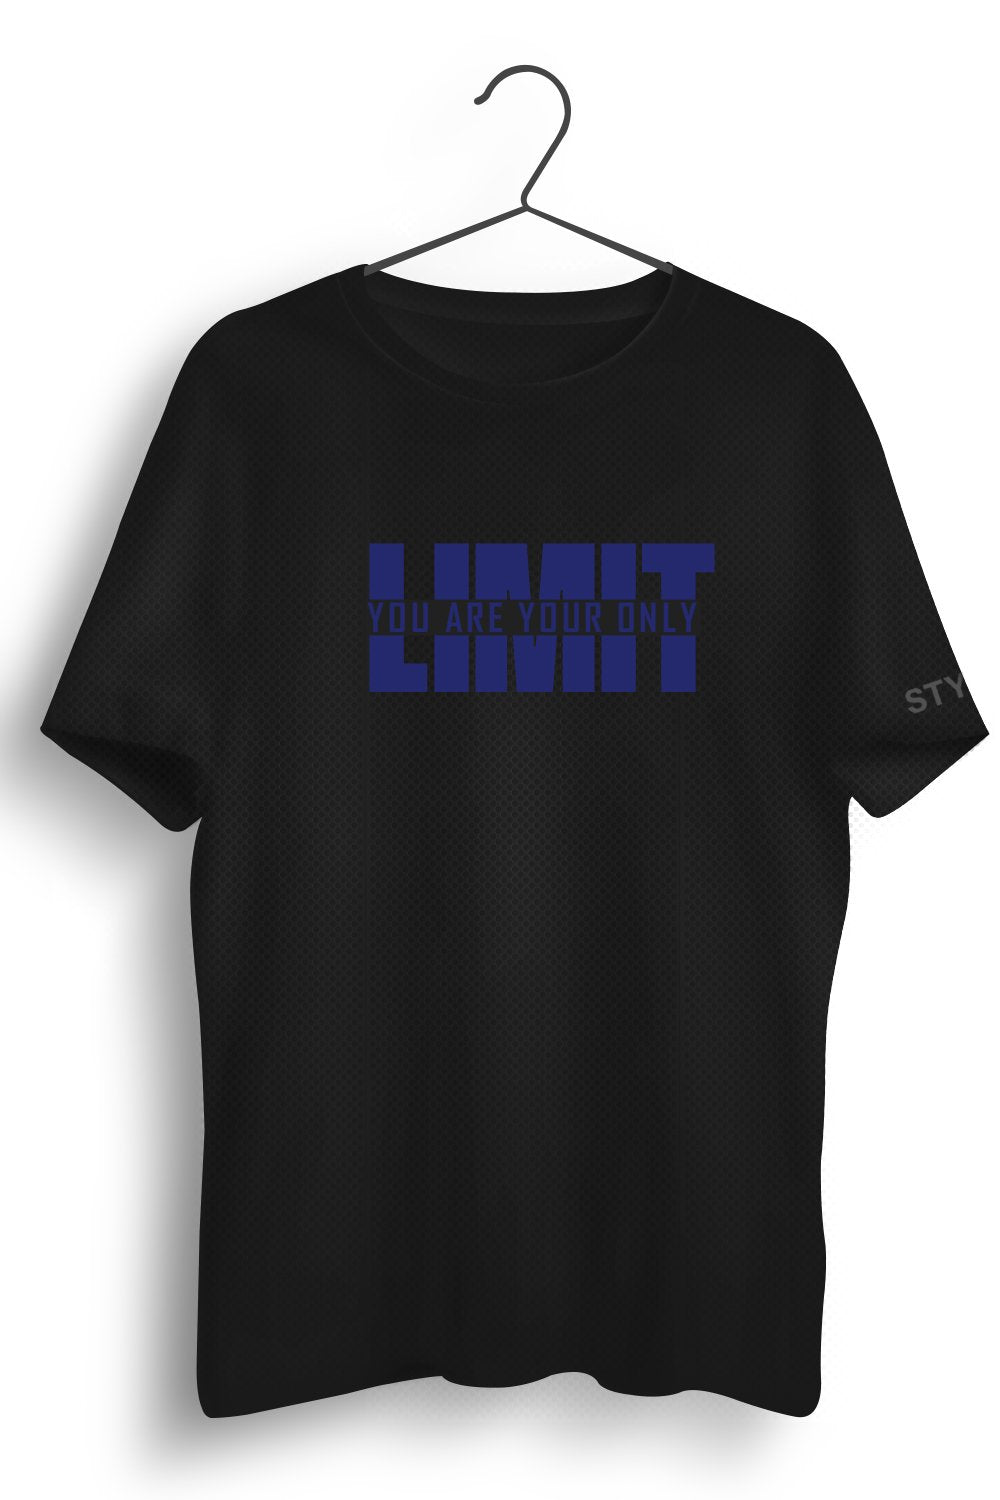 You Are Your Only Limit Printed Black Dry Fit Tee